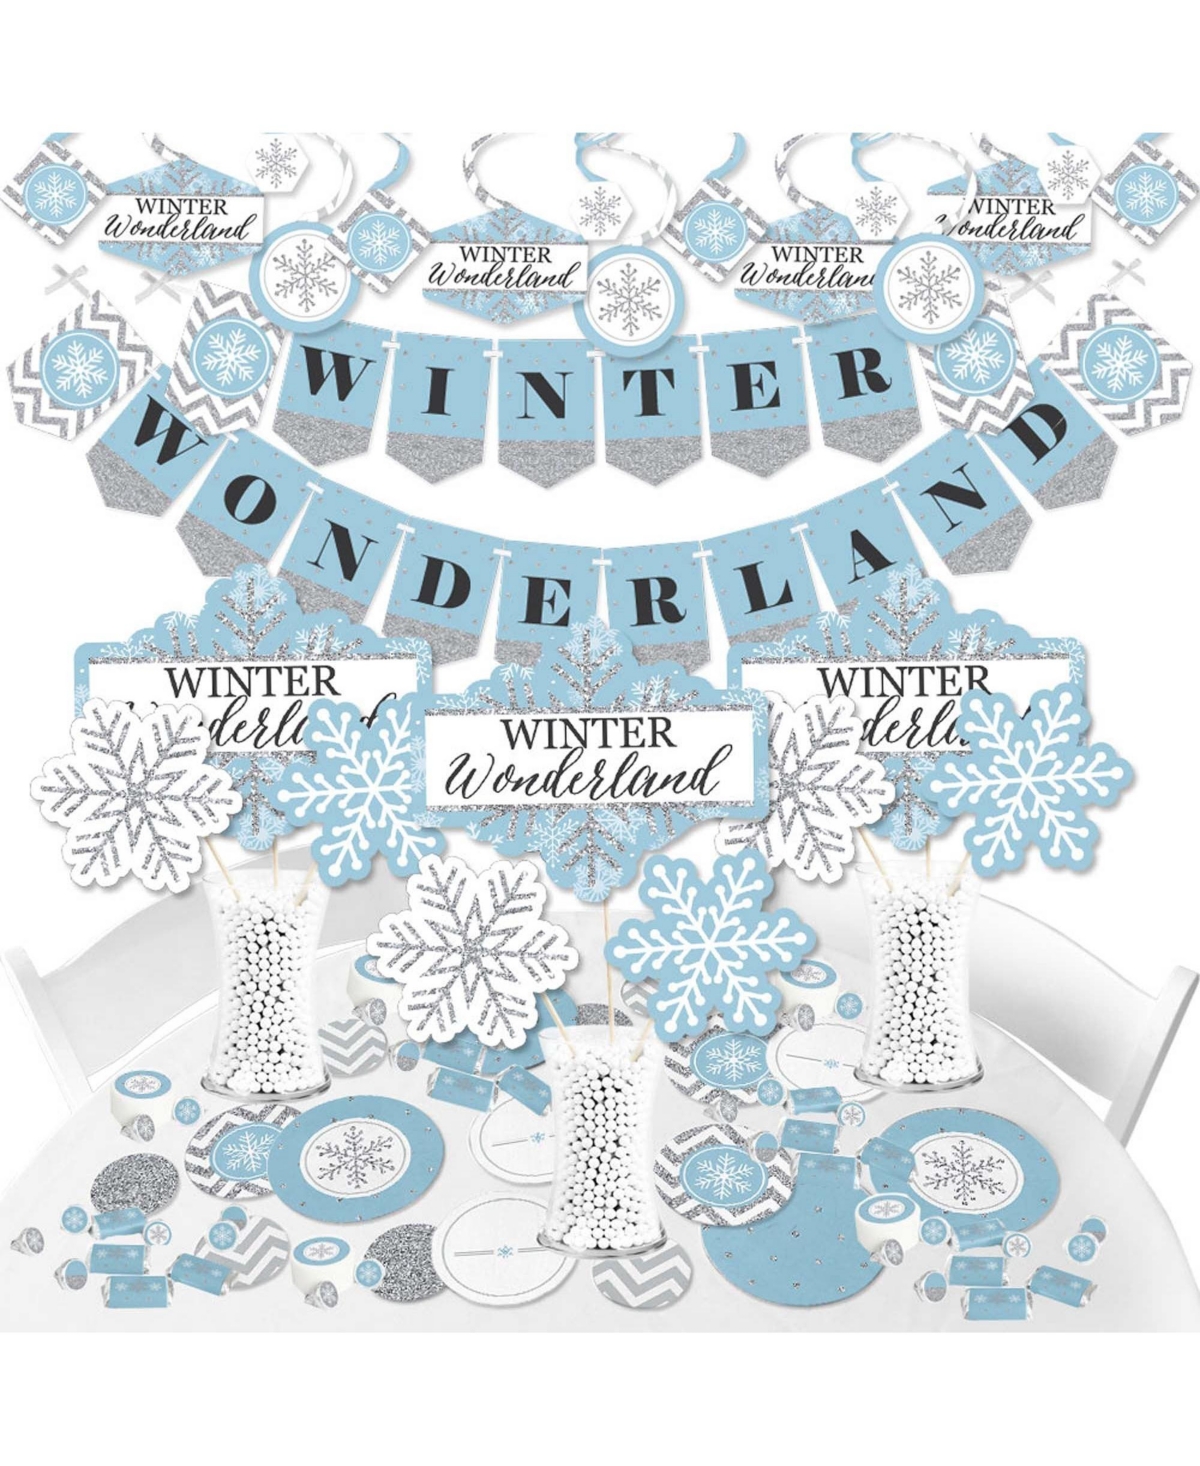 Winter Wonderland Party Favor Tag in Blue  Winter wonderland party, Party  favor tags, Winter wonderland baby shower